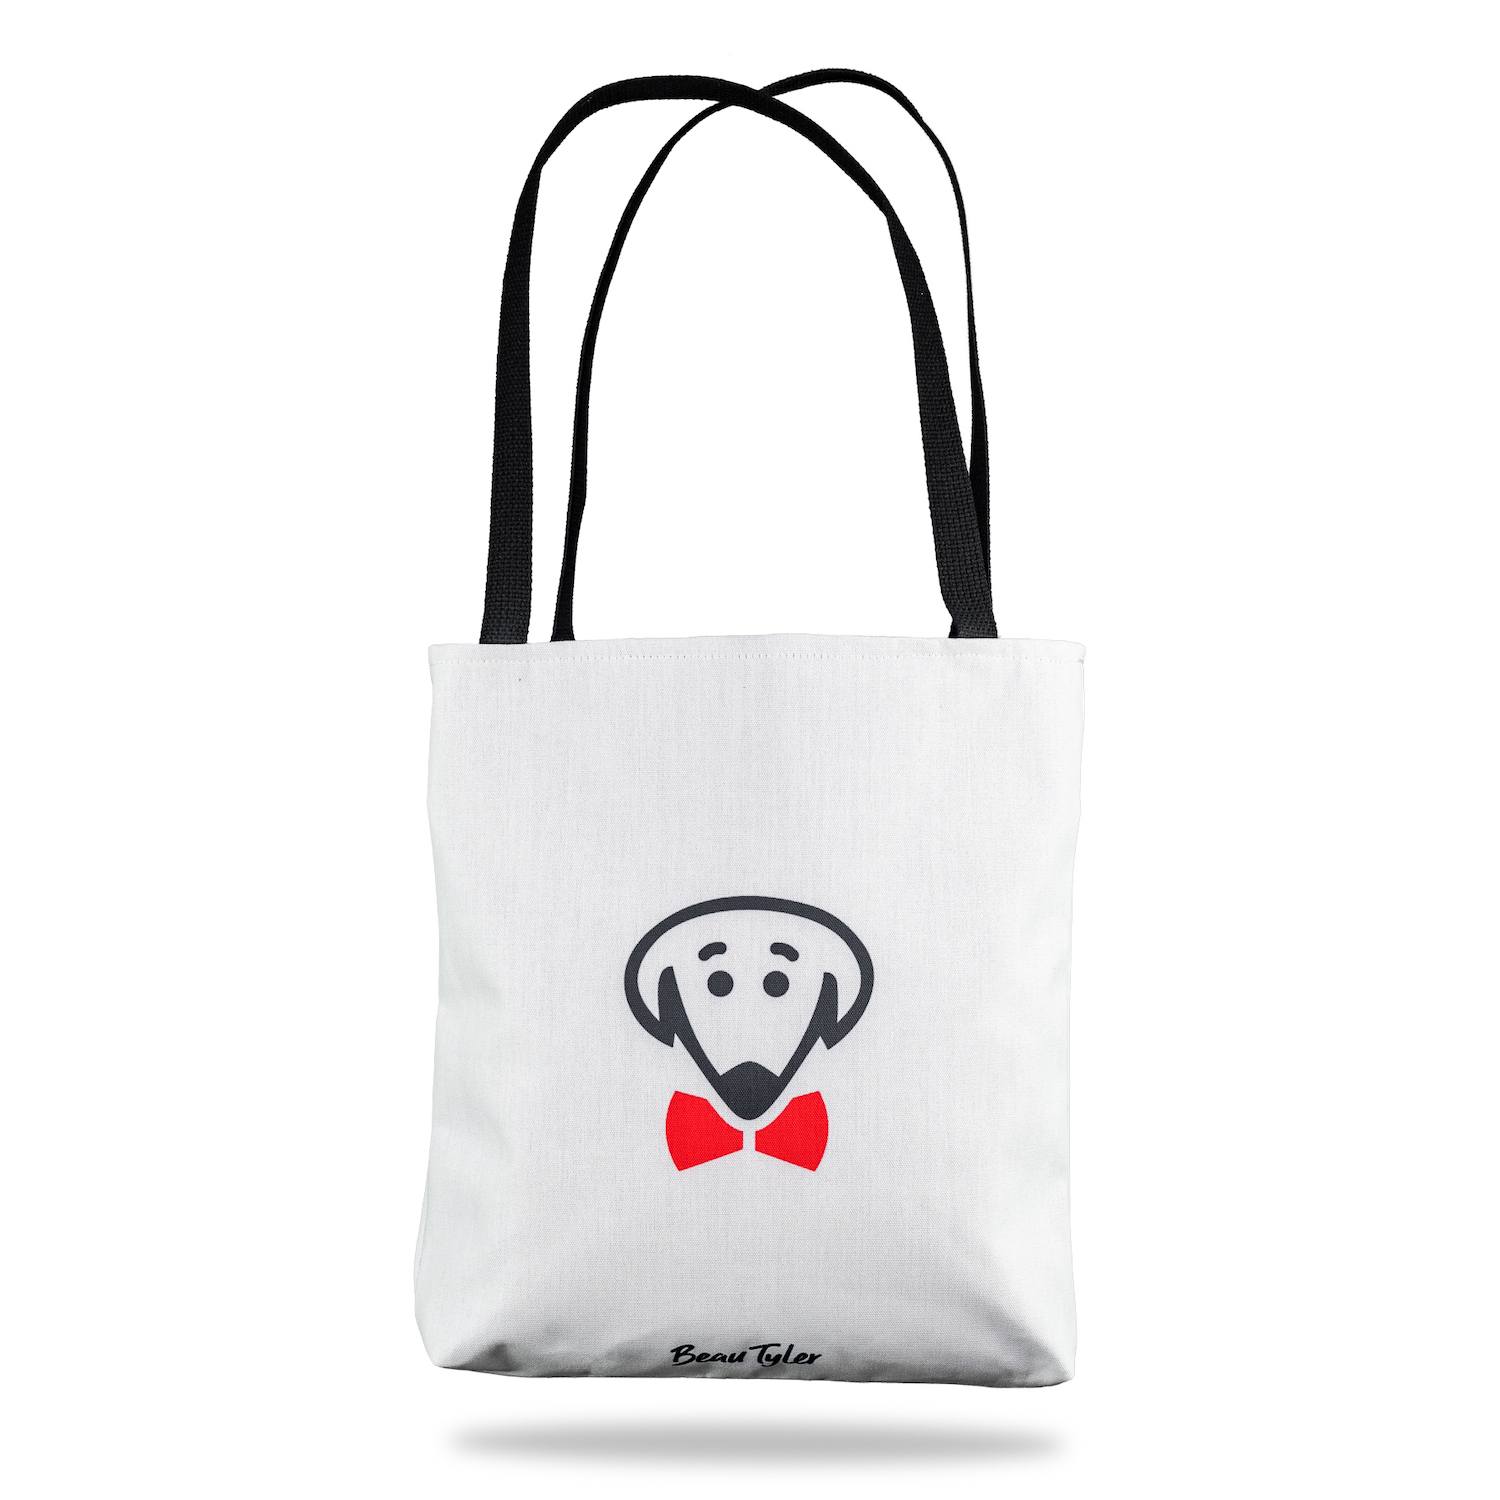 Beau Tyler - If I Could Fit My Dog In Here I Would! white tote bag back